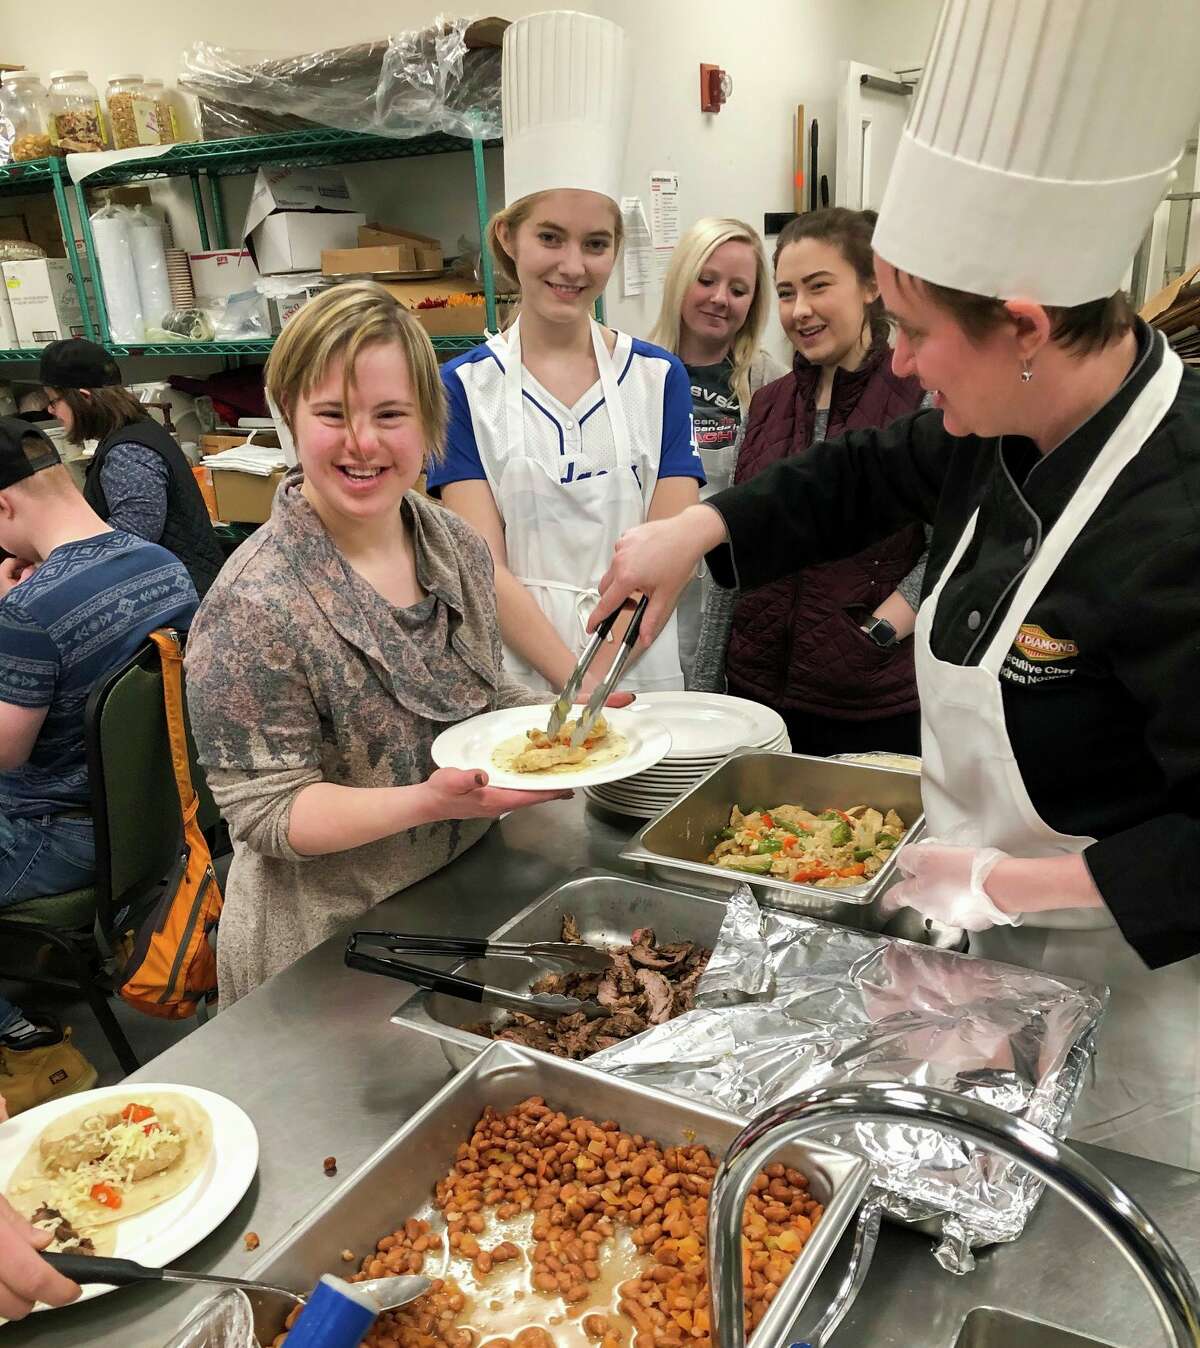 A local cooking club whose members who have varying intellectual and developmental disabilities cook a meal together from scratch with guidance from the kitchen staff at Dow Diamond. (Photo provided/Brad Tammen)